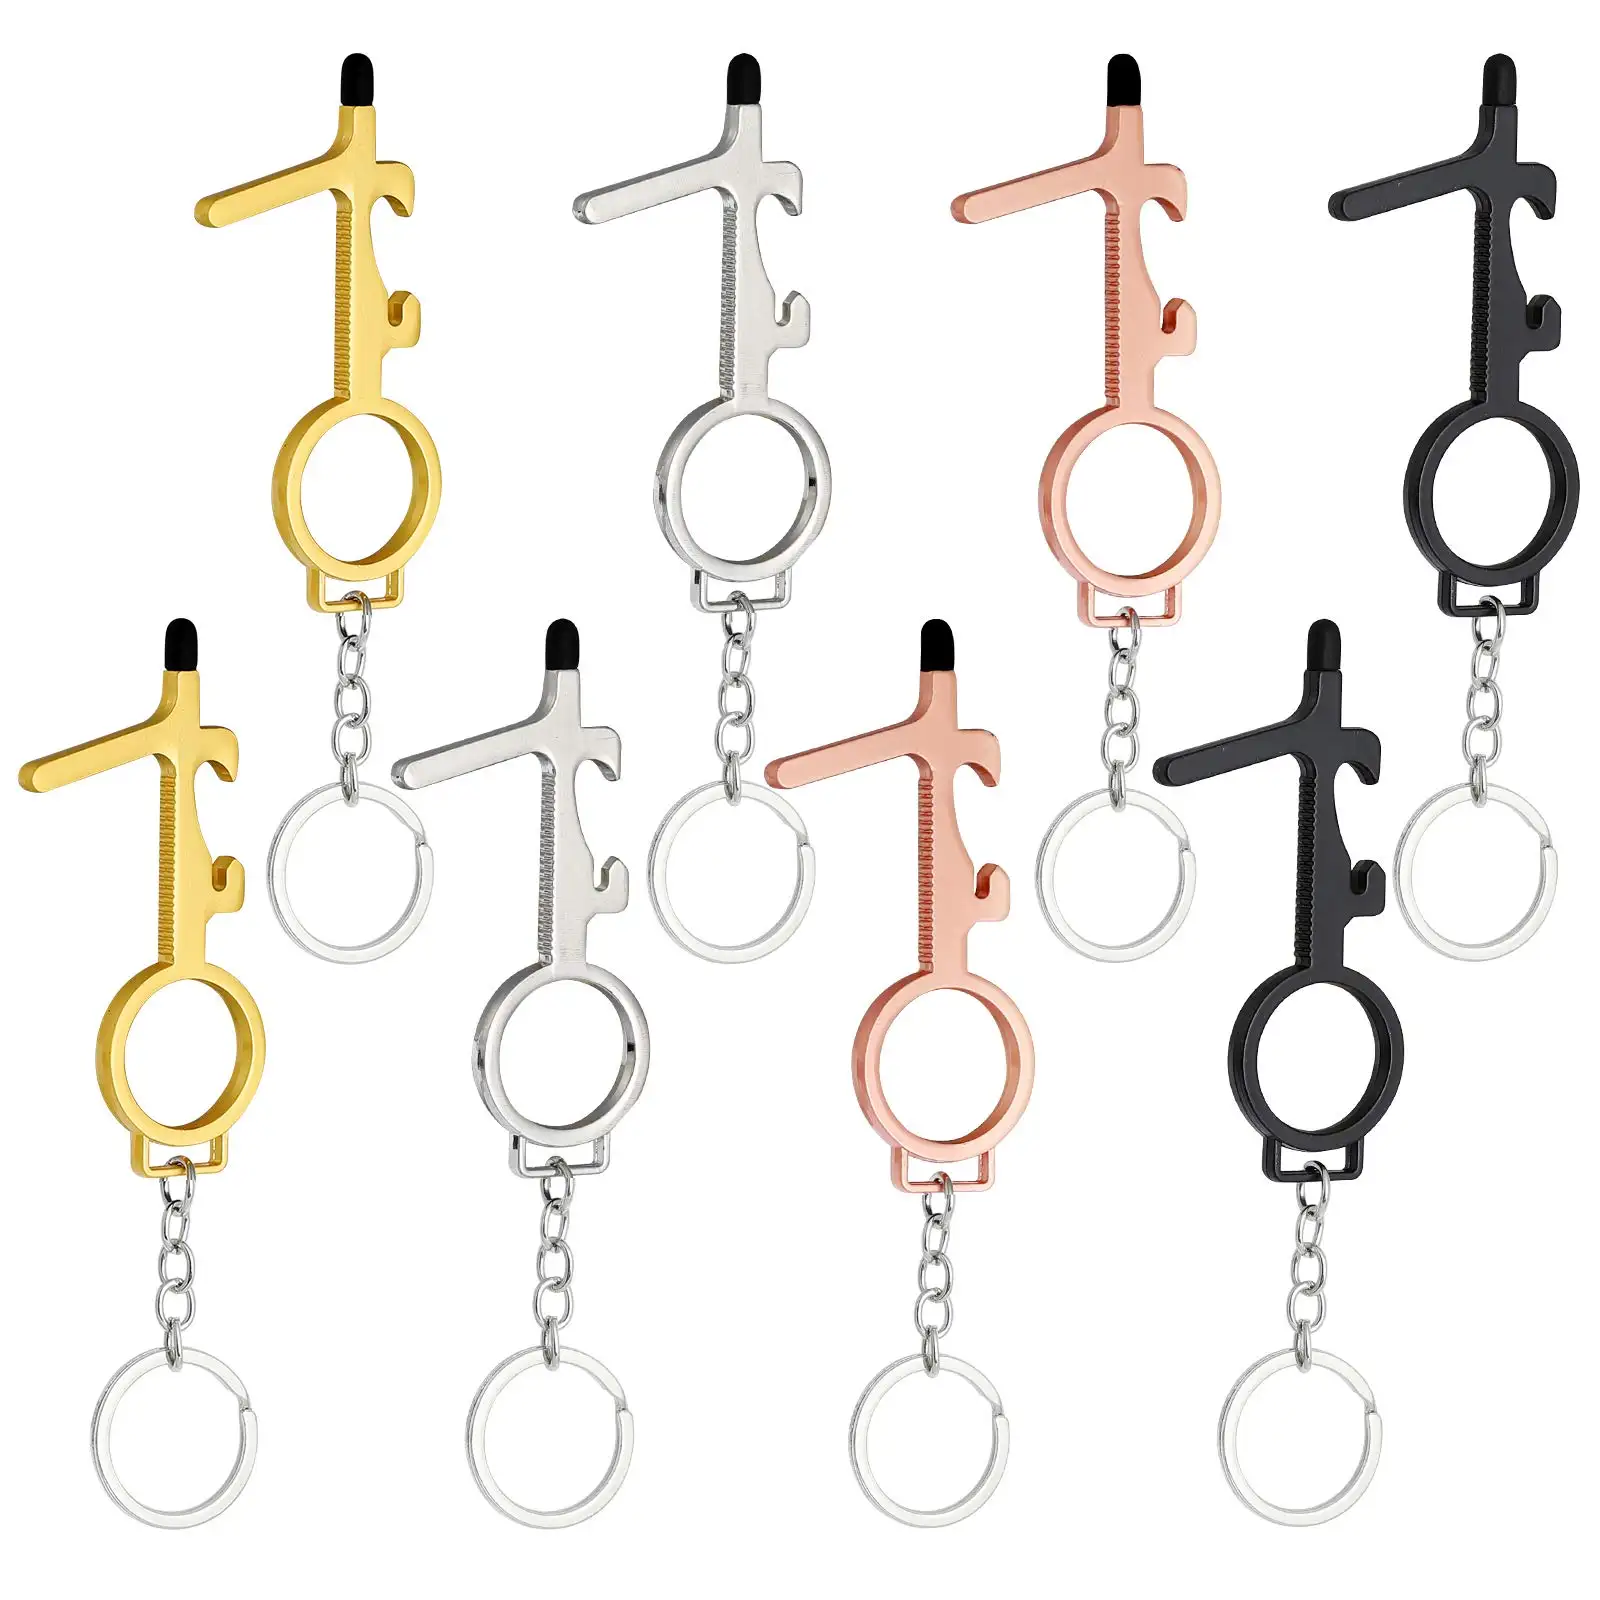 Women Self Defense Keychain Safety Key Chain Key Door Tool Touchless Keys Keychain No Touch Door Opener With Stylus